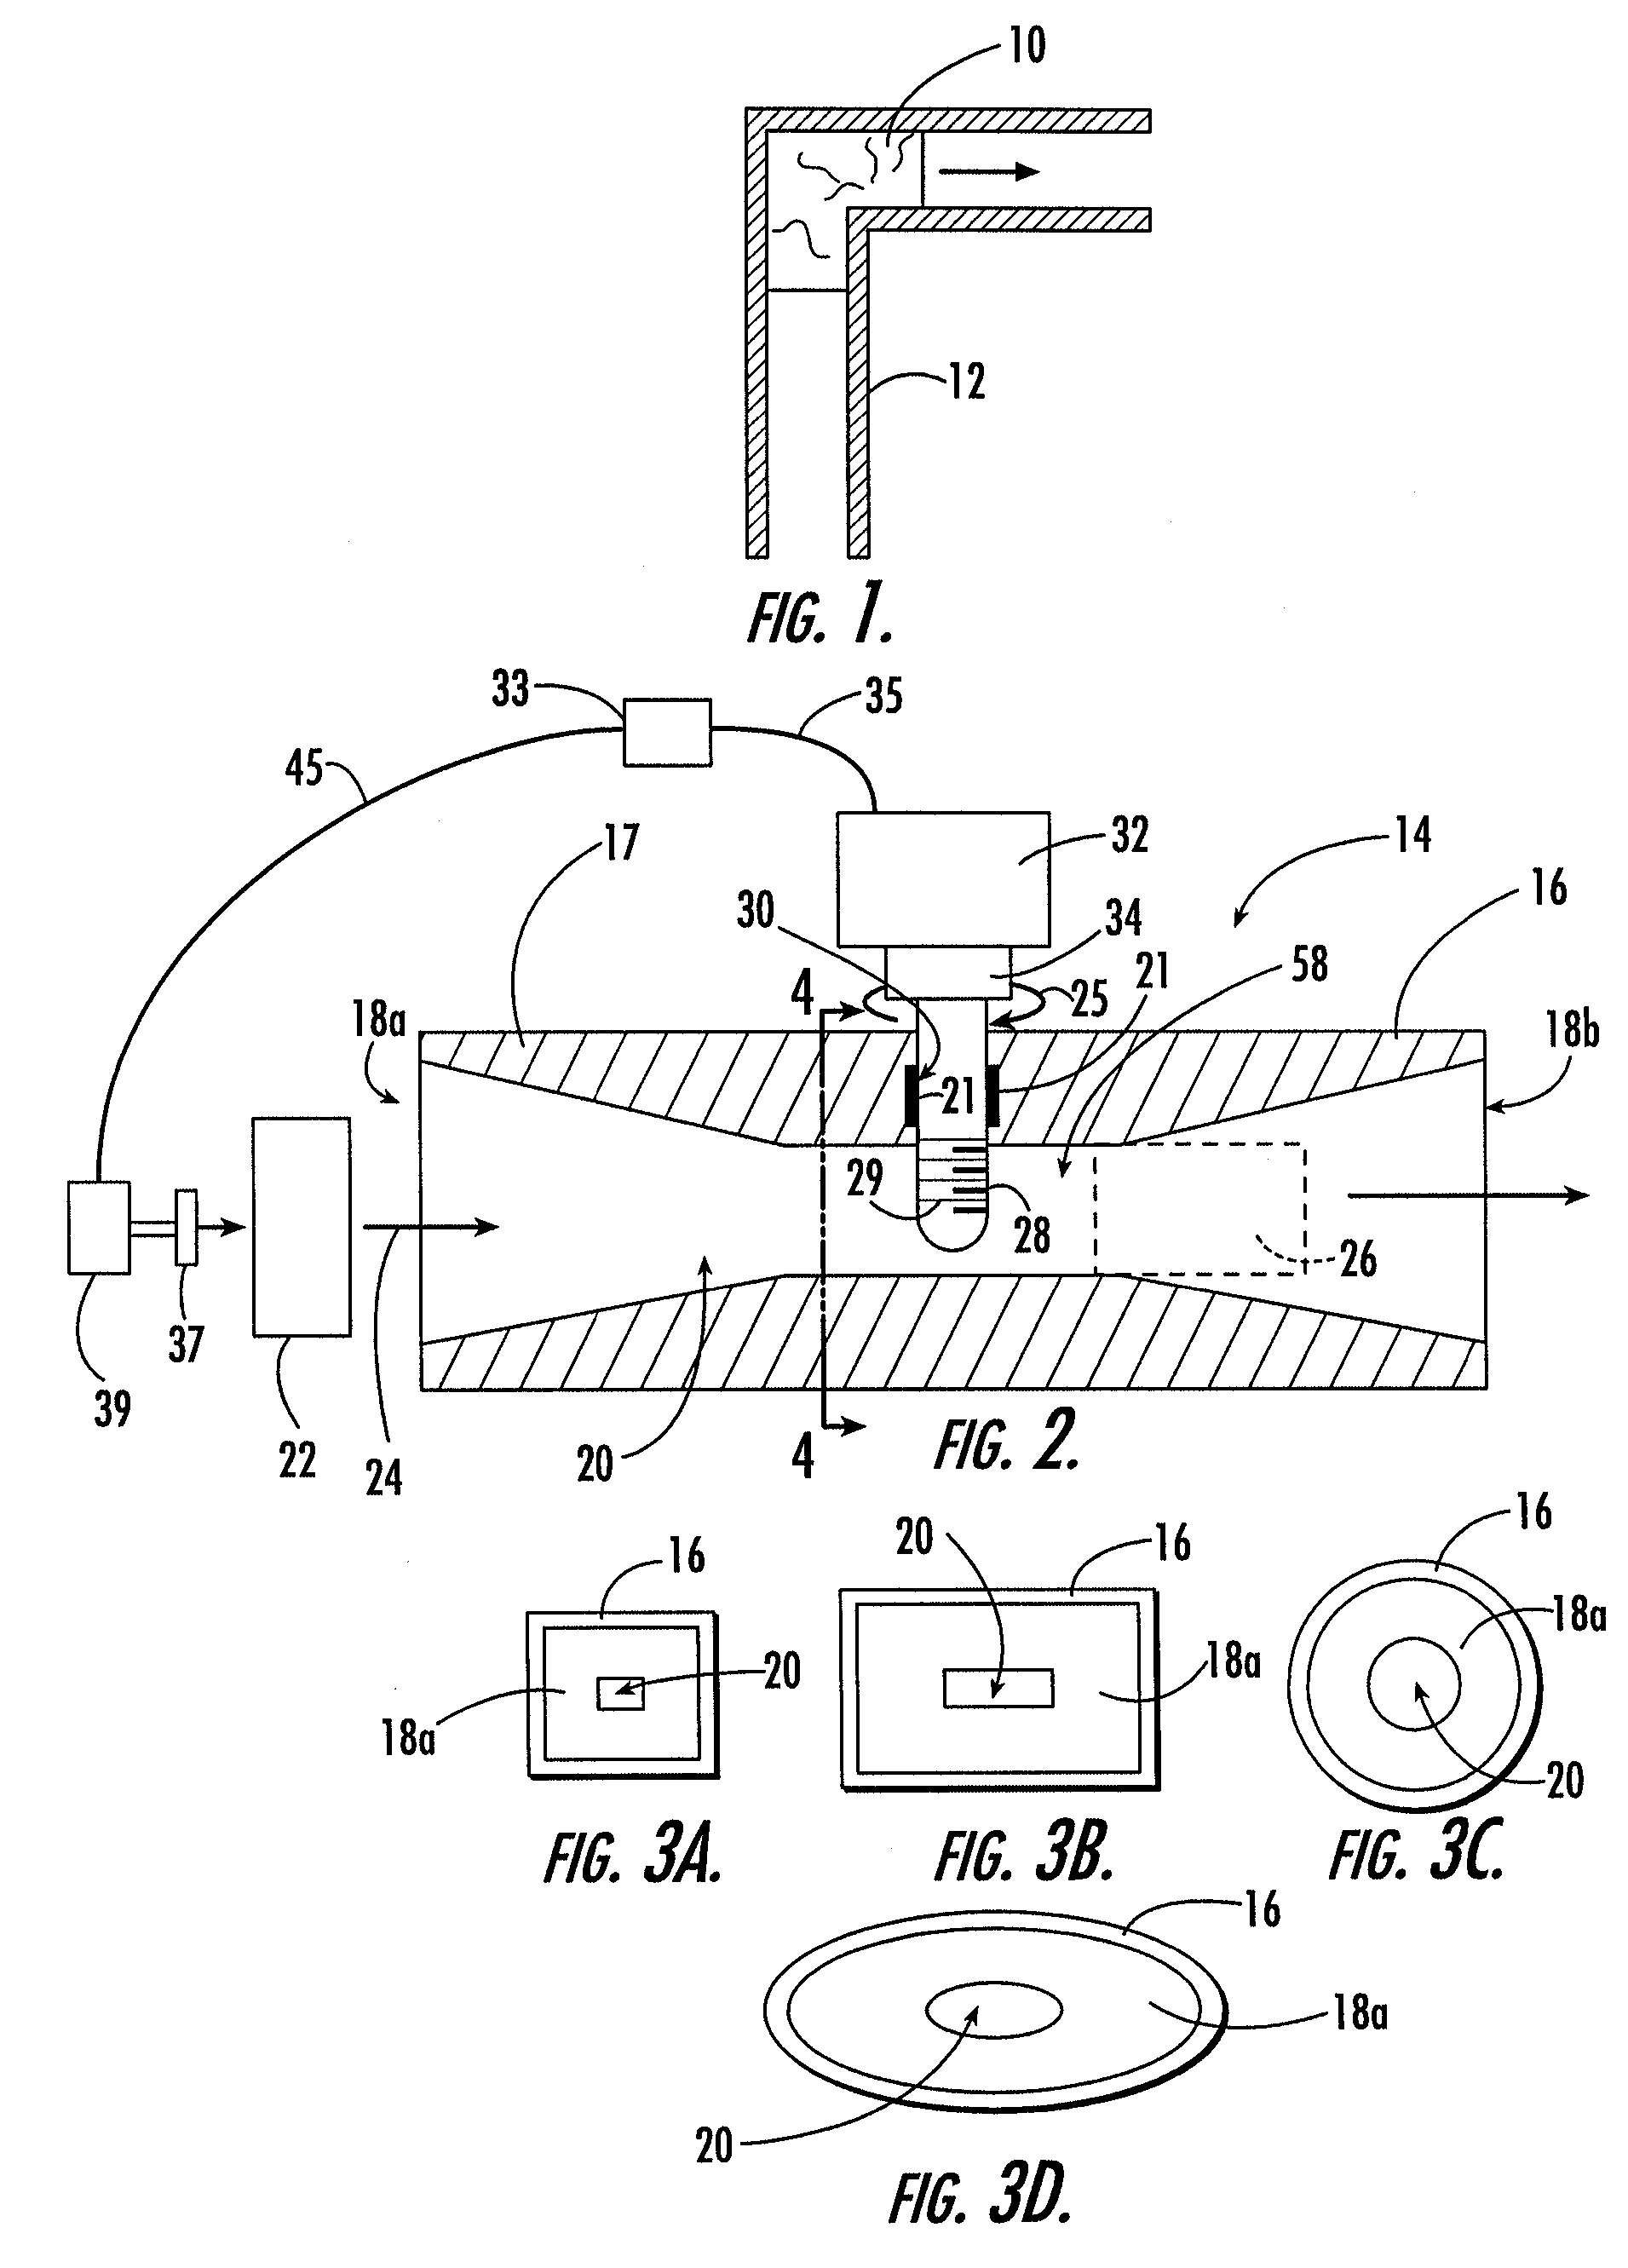 Method and apparatus for producing a refined grain structure